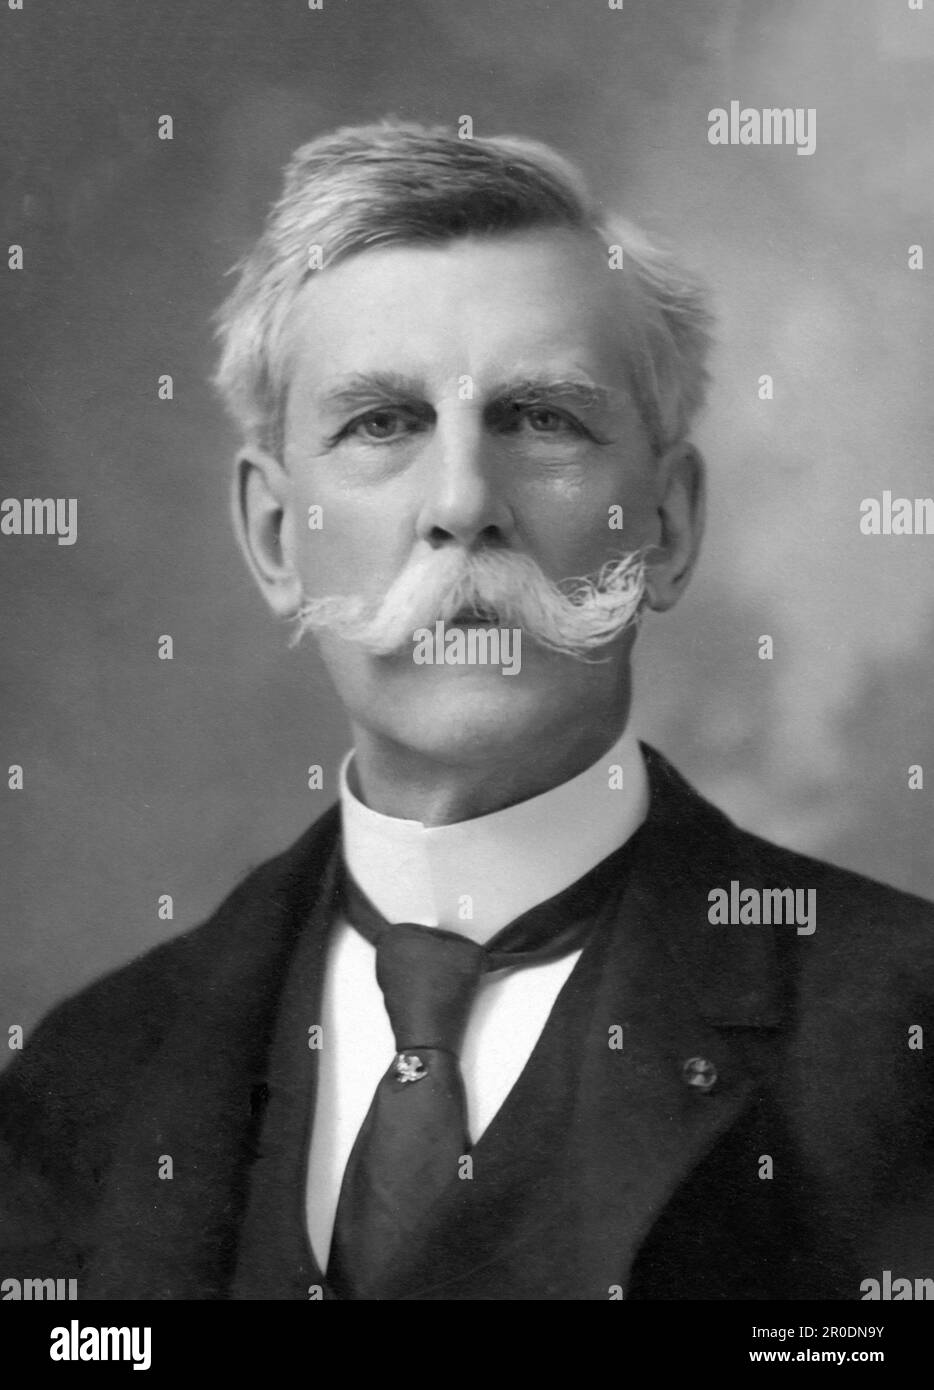 Oliver Wendell Holmes Junior. Portrait of the American Supreme Court Justice, Oliver Wendell Holmes Jr. (1841-1935) by Pach Brothers Studio, c. 1902 Stock Photo